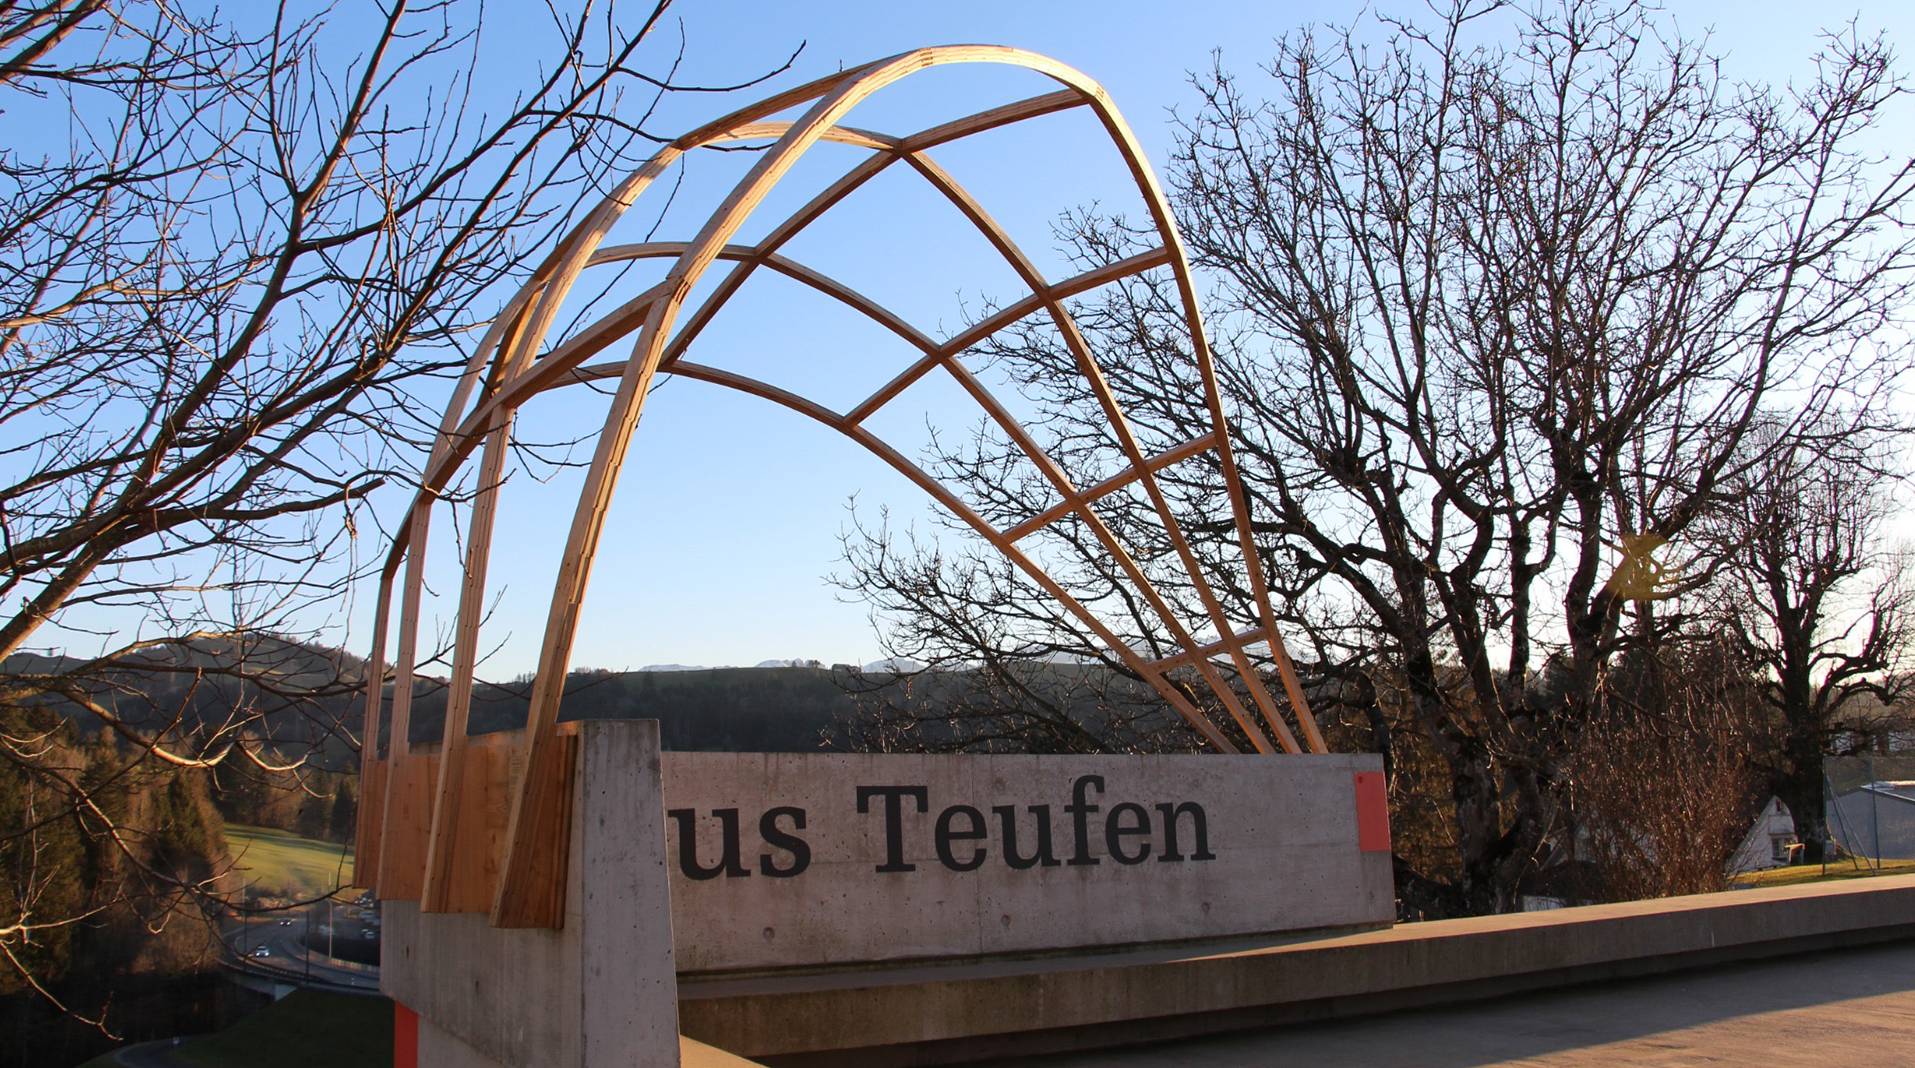 The final PROTOTYPE PAVILION at the Zeughaus Teufen in Switzerland